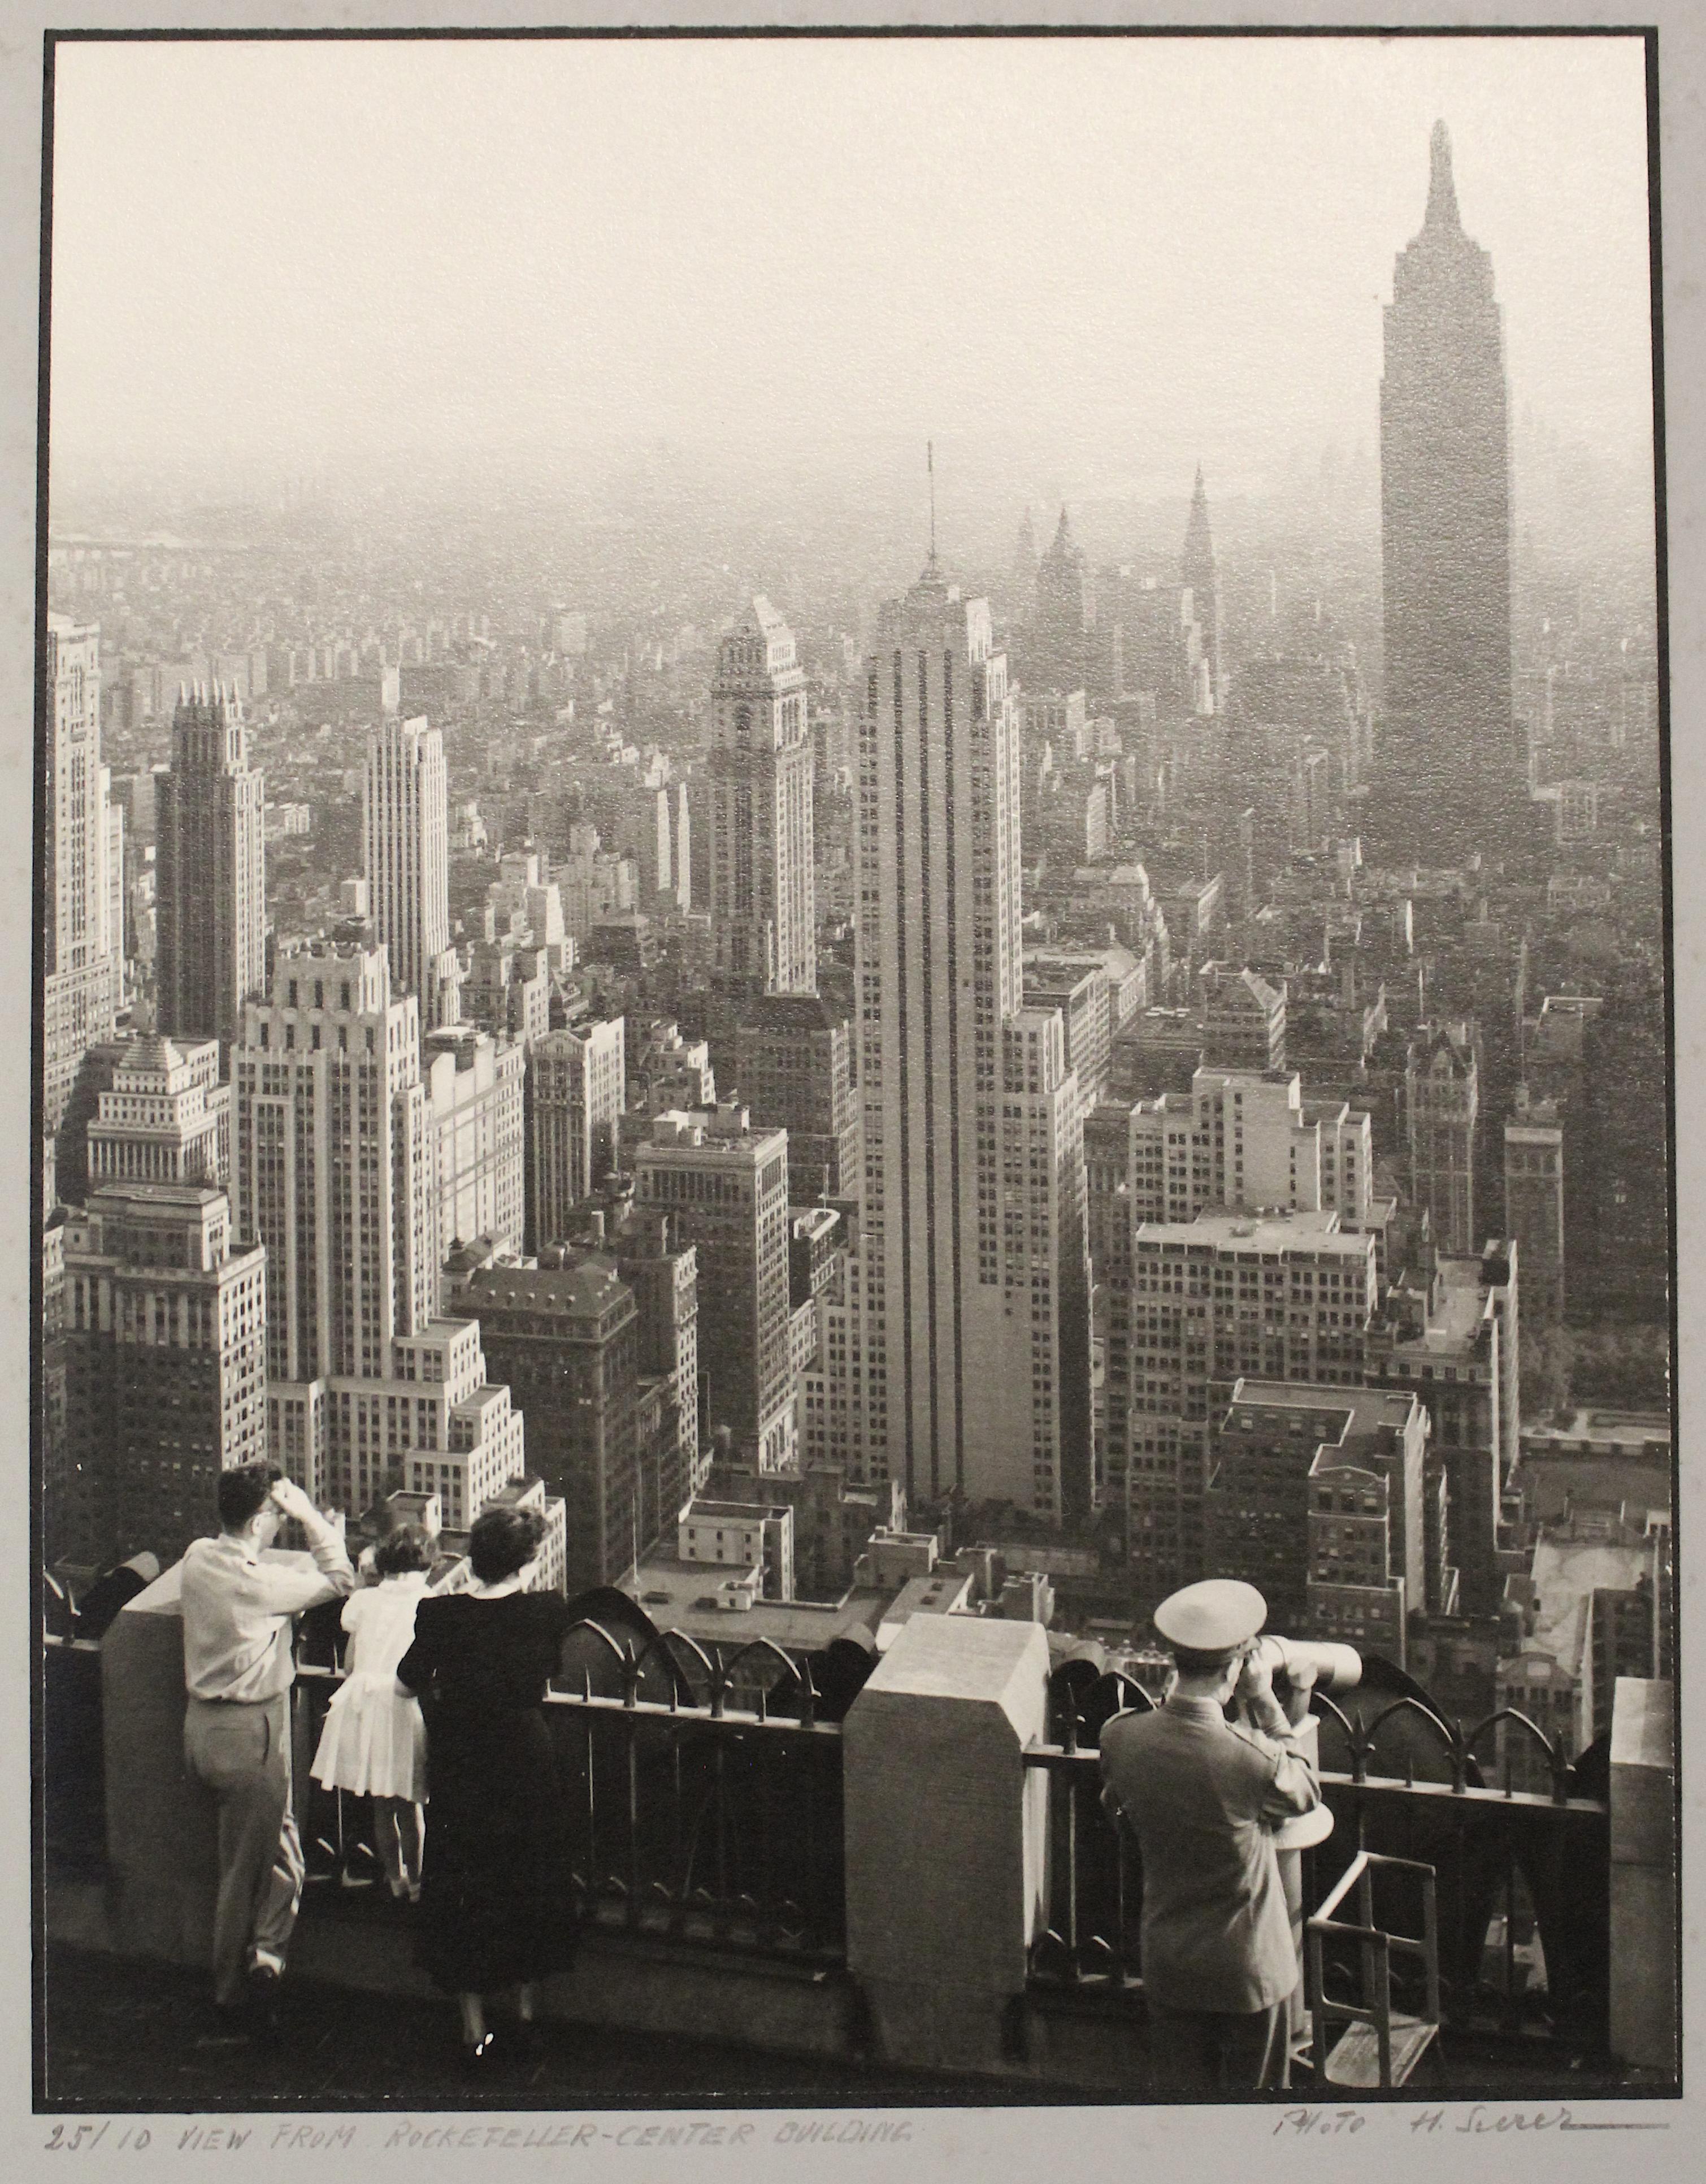 H. Surer Black and White Photograph - 25/10 View from Rockefeller-Center Building